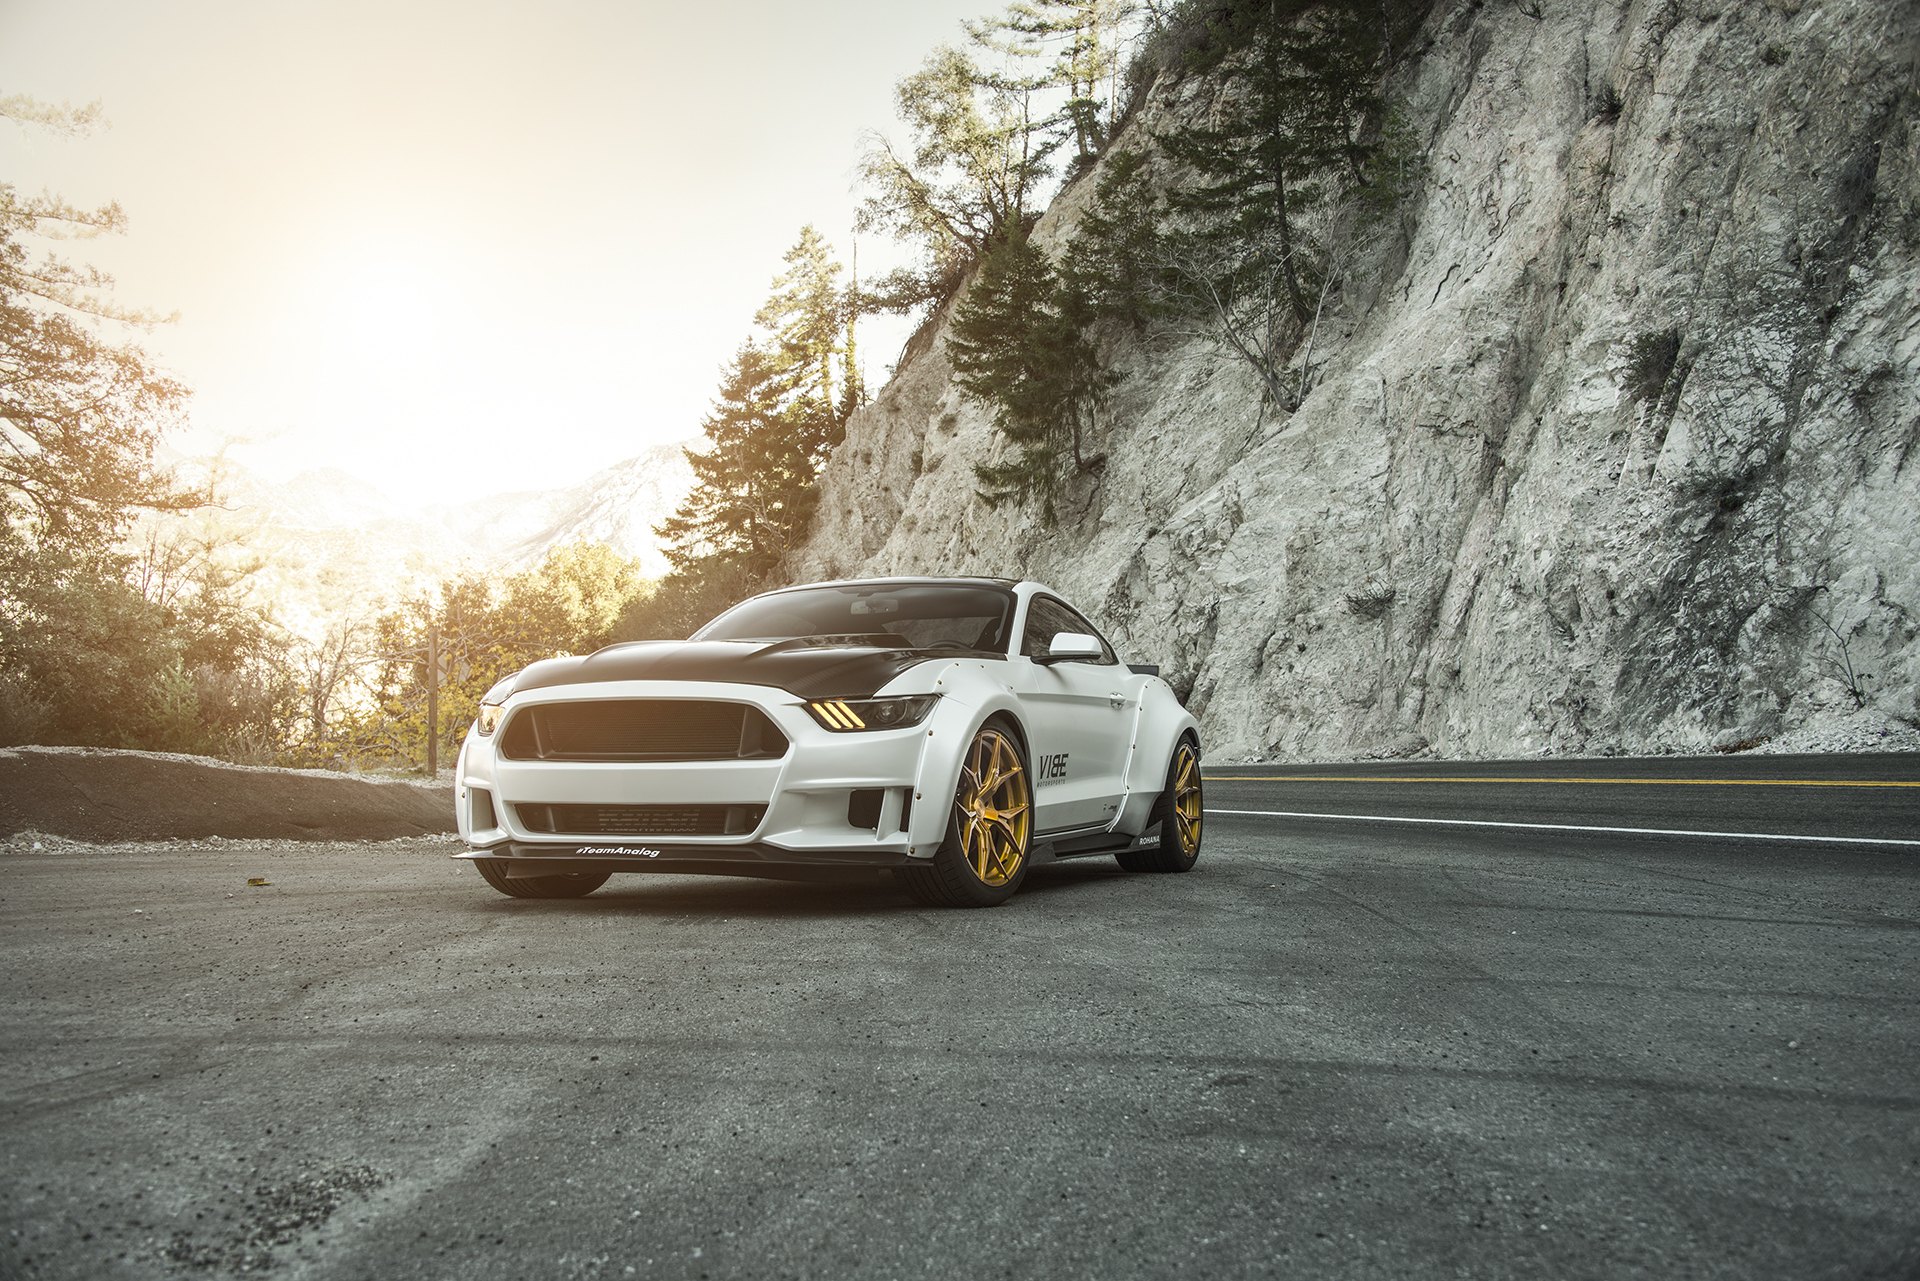 Performance Modified S550 Mustang In the Canyons - Photo by Vibe Motorsports